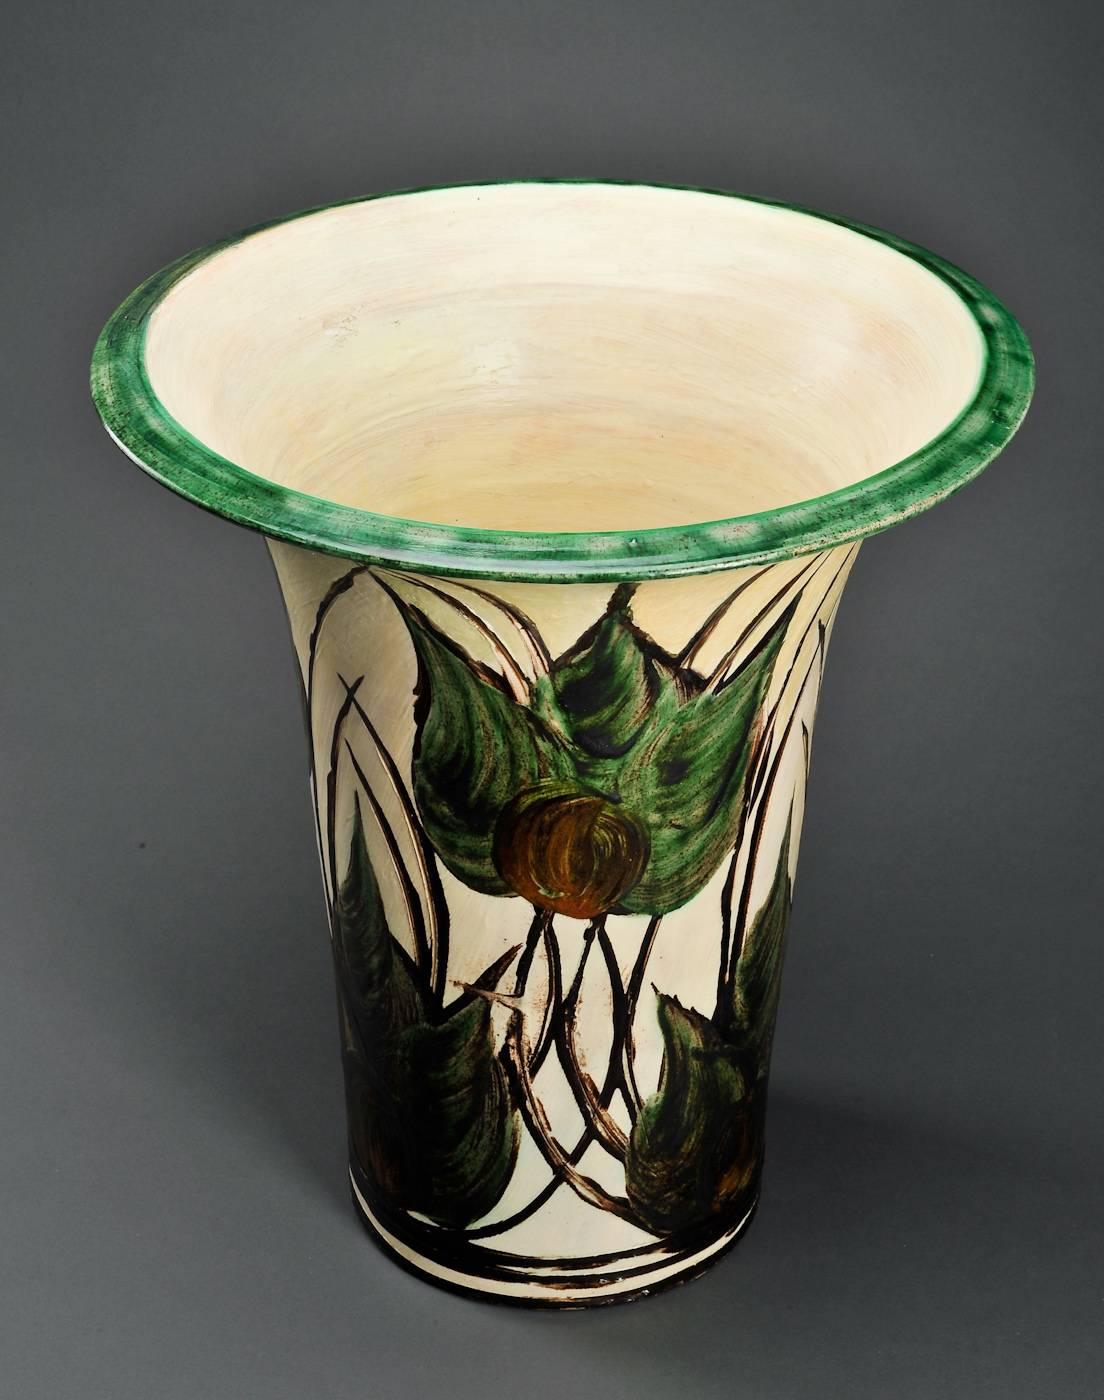 Large-scale vase circa 1910-1920 Decorated by Artist Julia Kabel for the Kähler Keramik Factory Located in Naestved, Denmark.